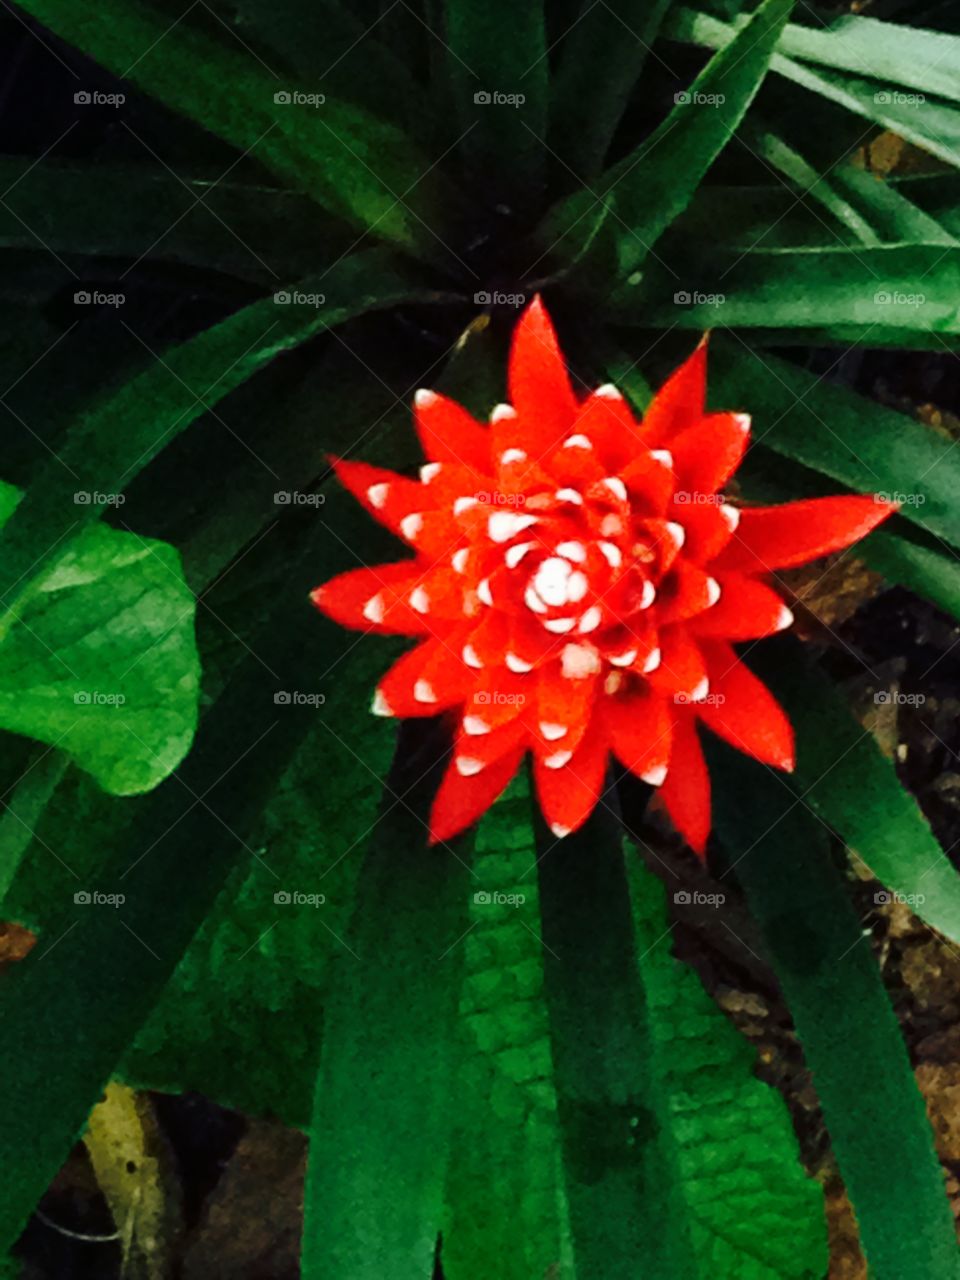 Spiky red tropical Florida bloom